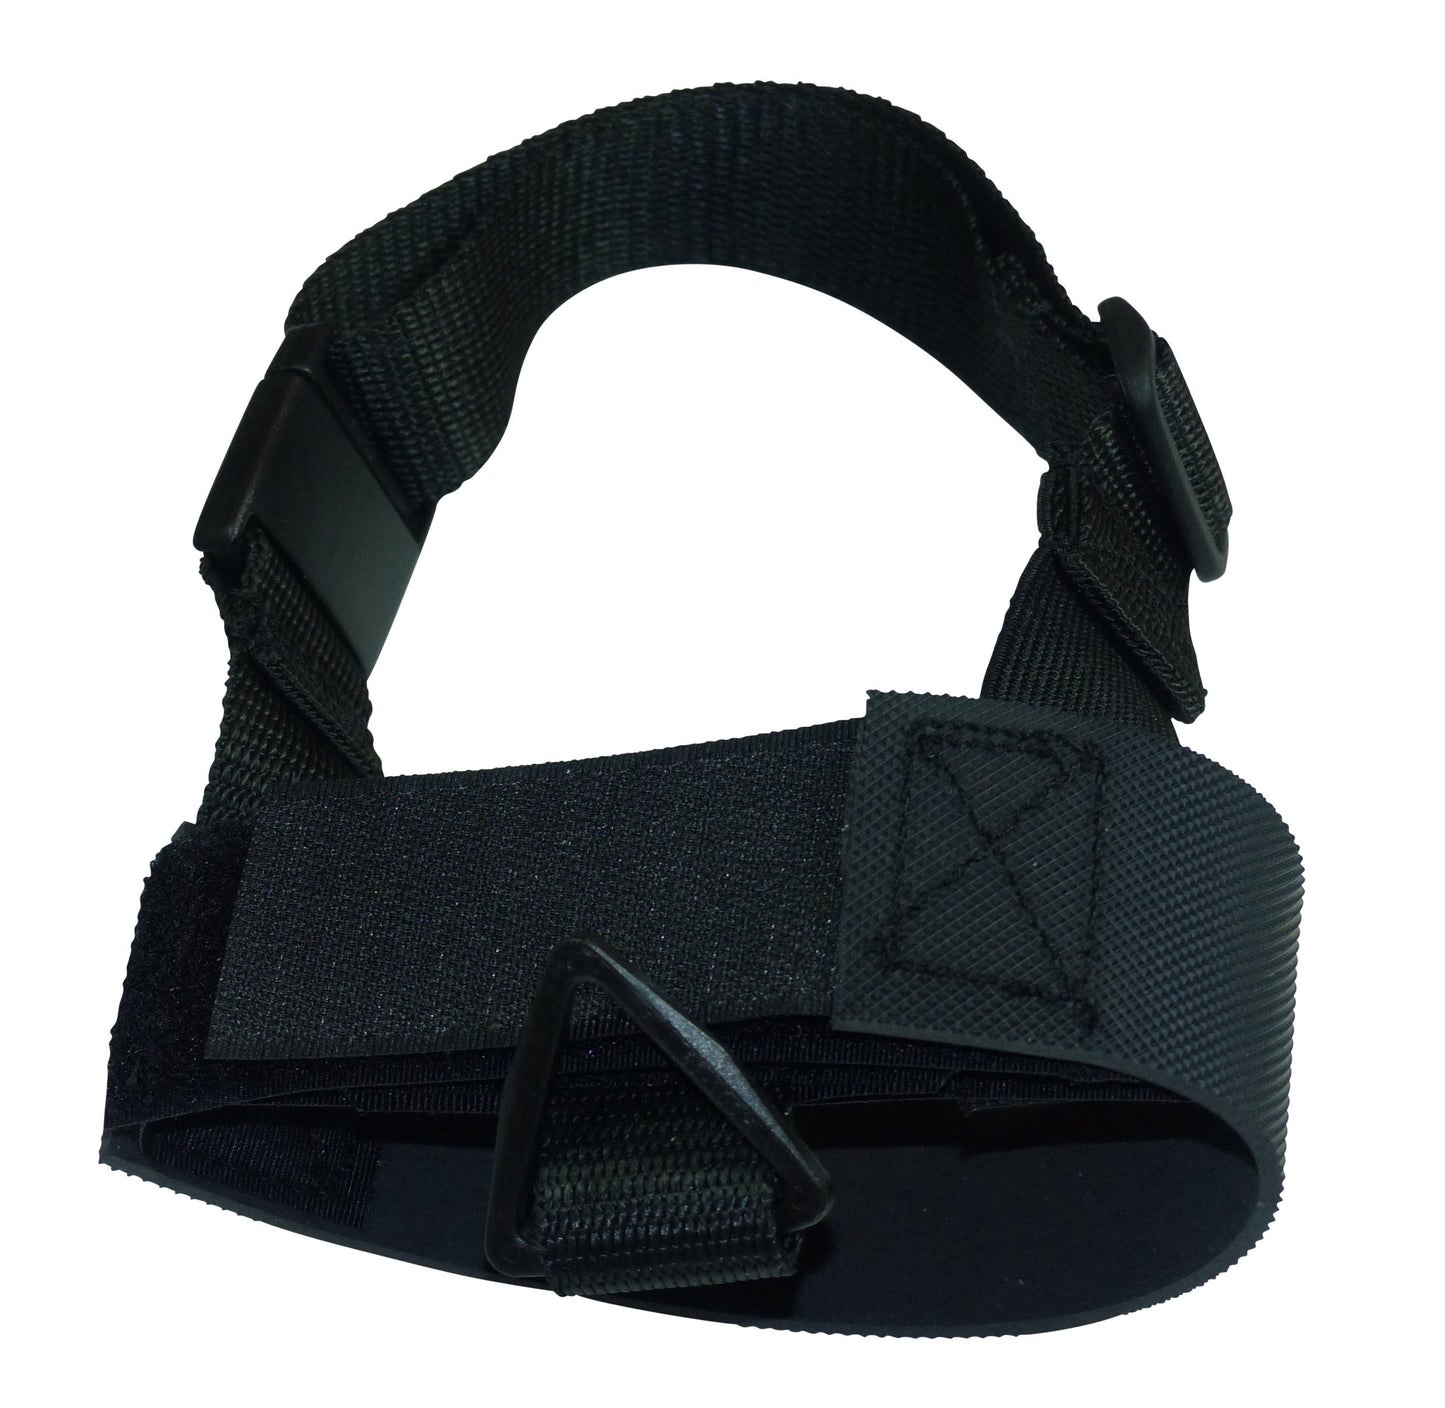 Musmate Shoe Harness for the Left Shoe